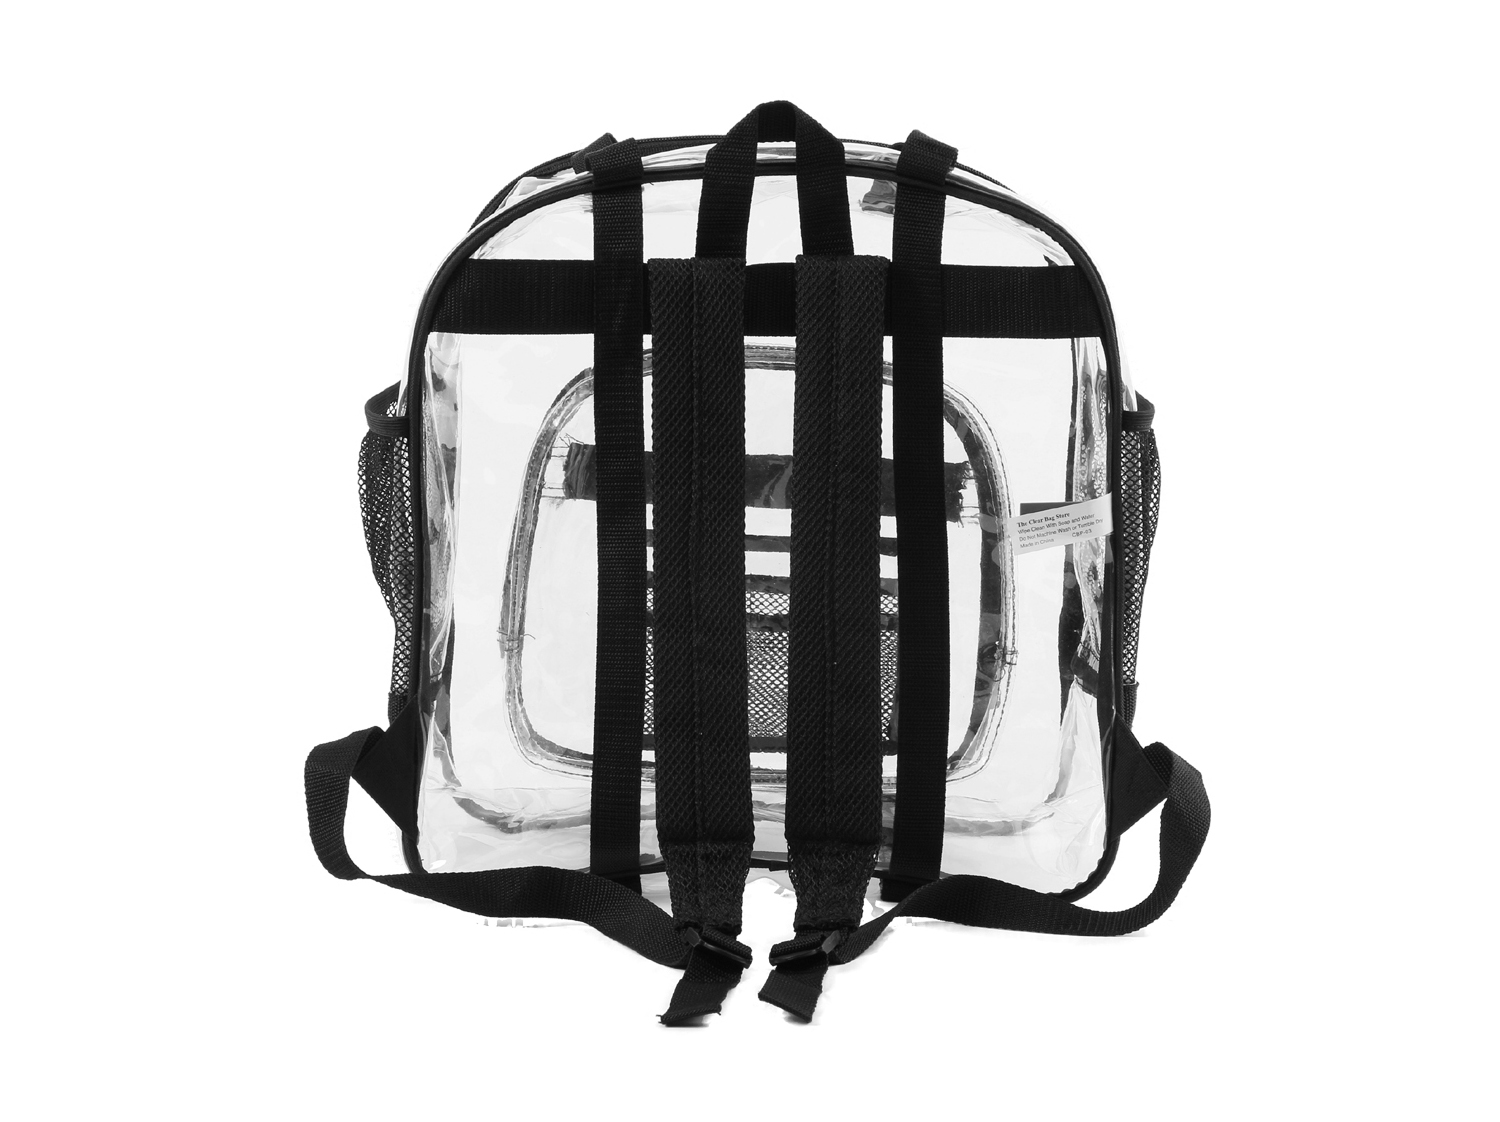 Clear Backpacks for Correctional Officers and Students